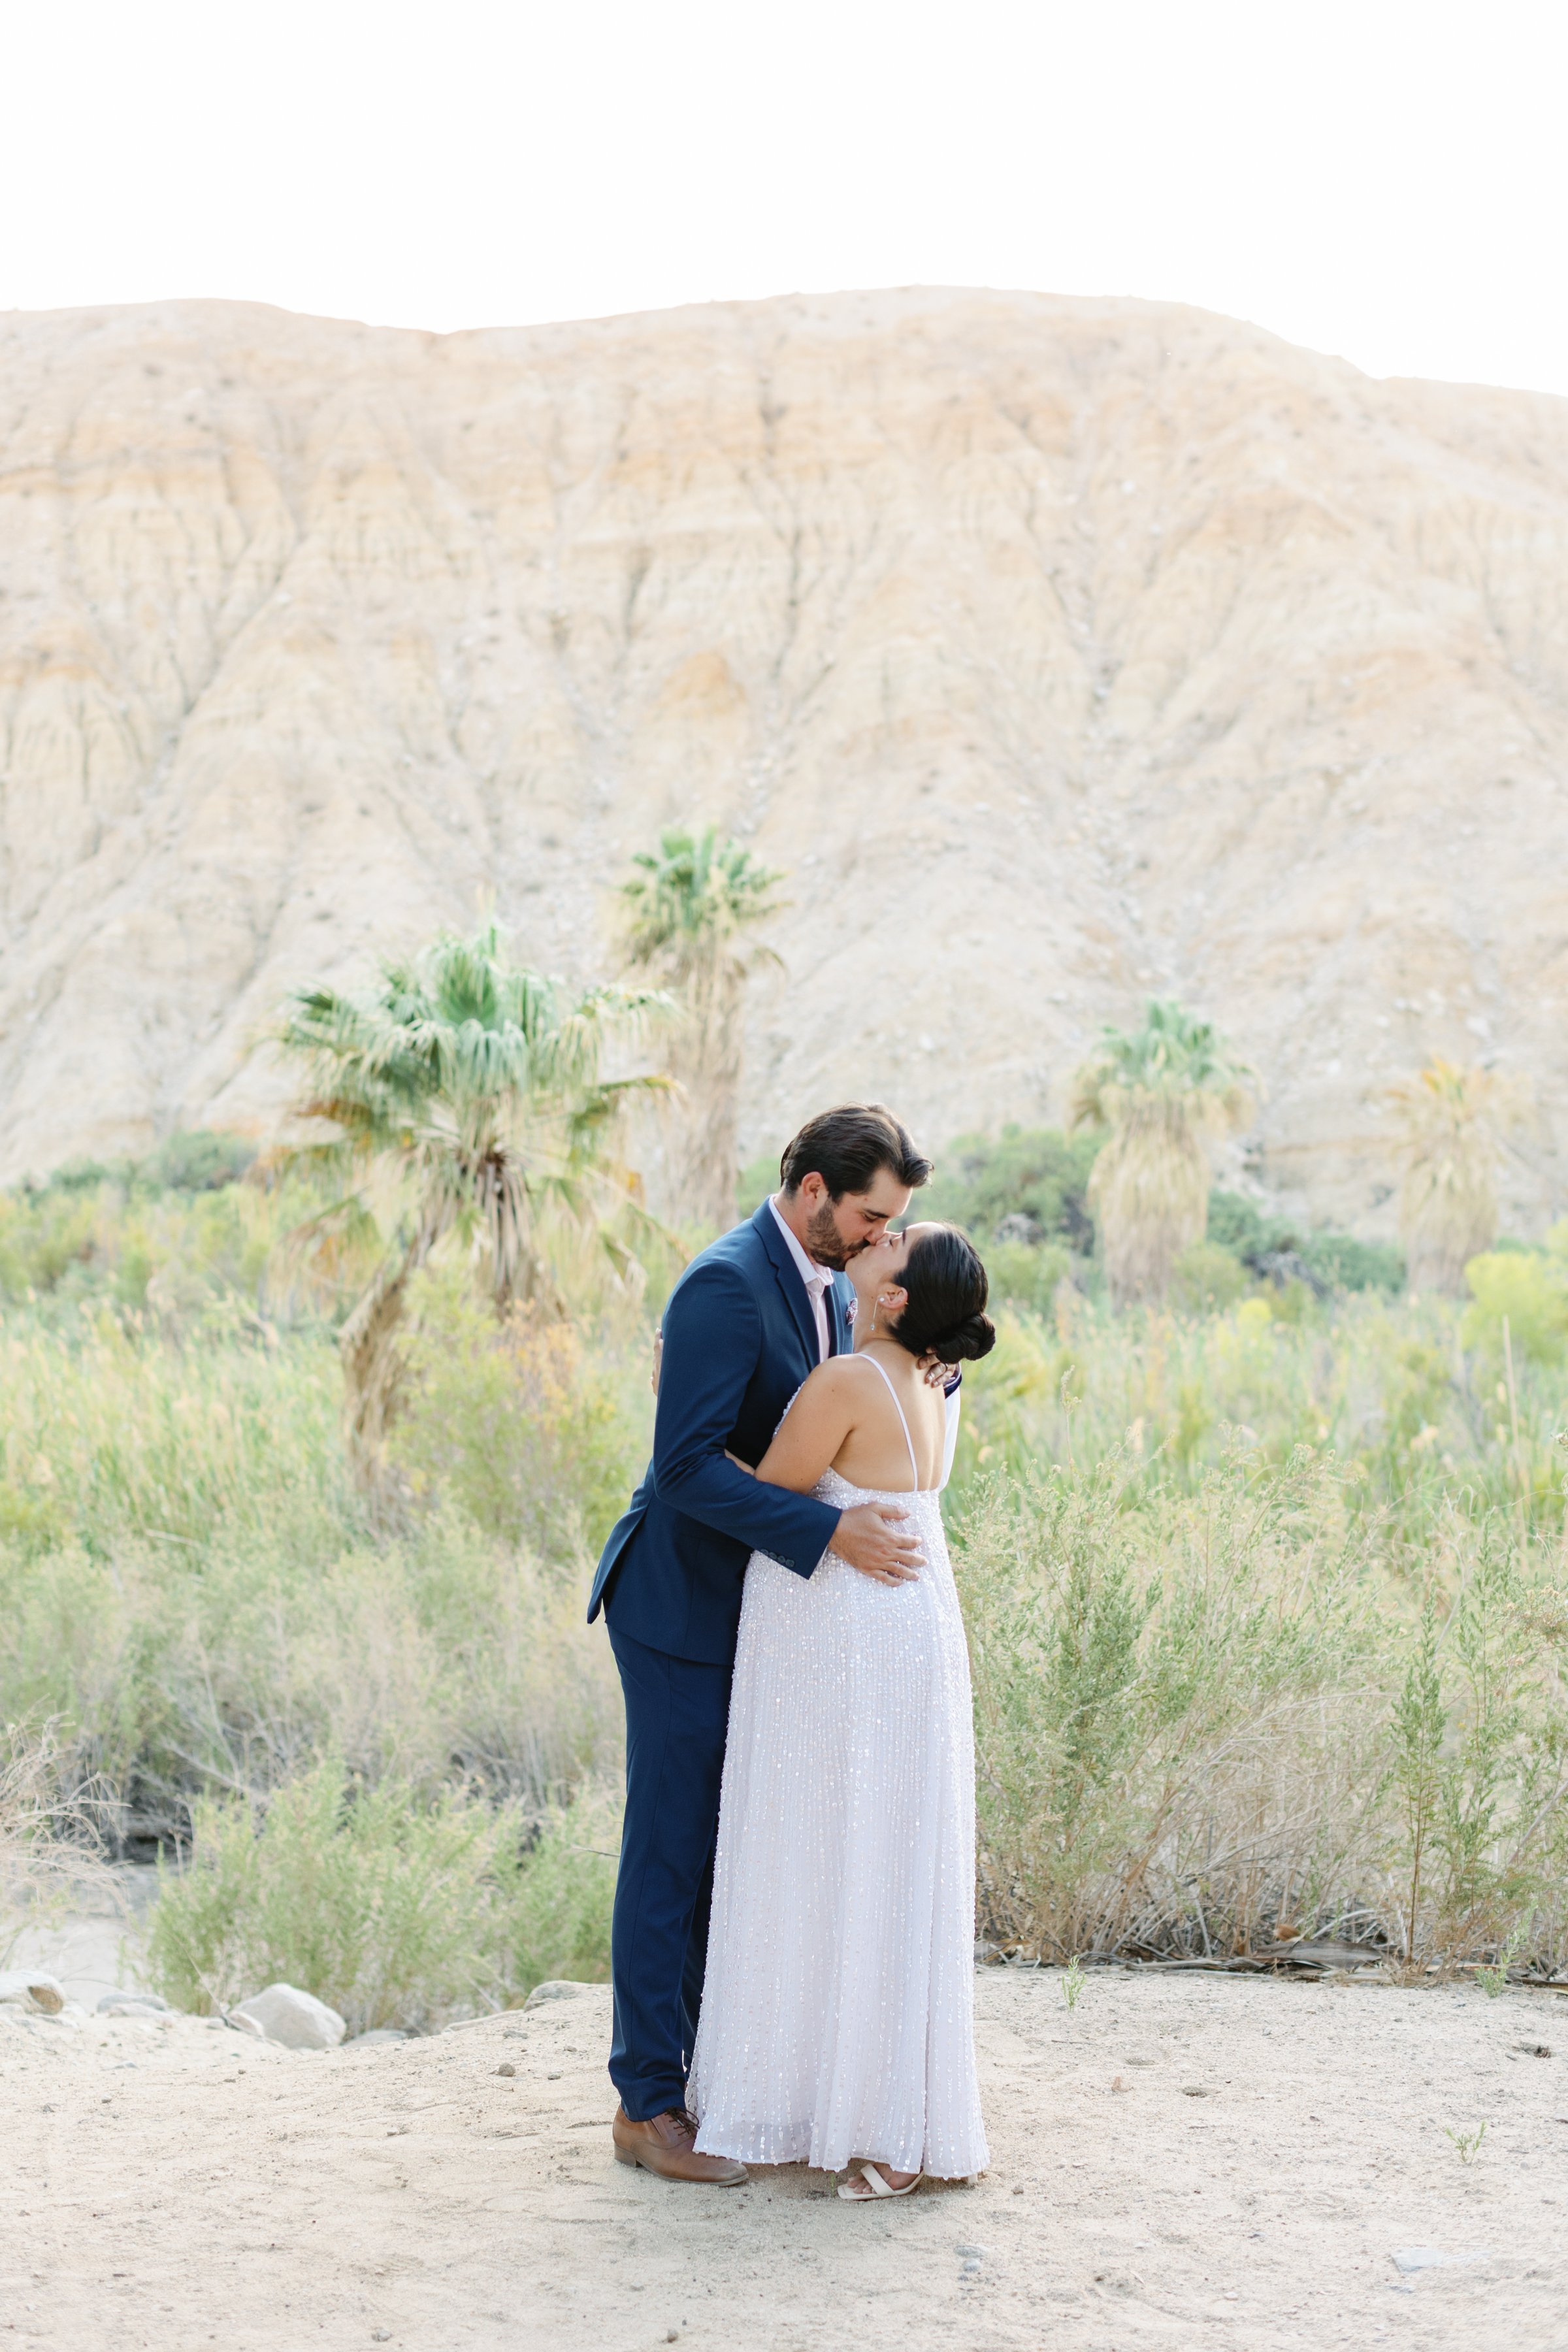 Natalie and Ricardo's Thousand Palm Oasis Elopement-11.jpg